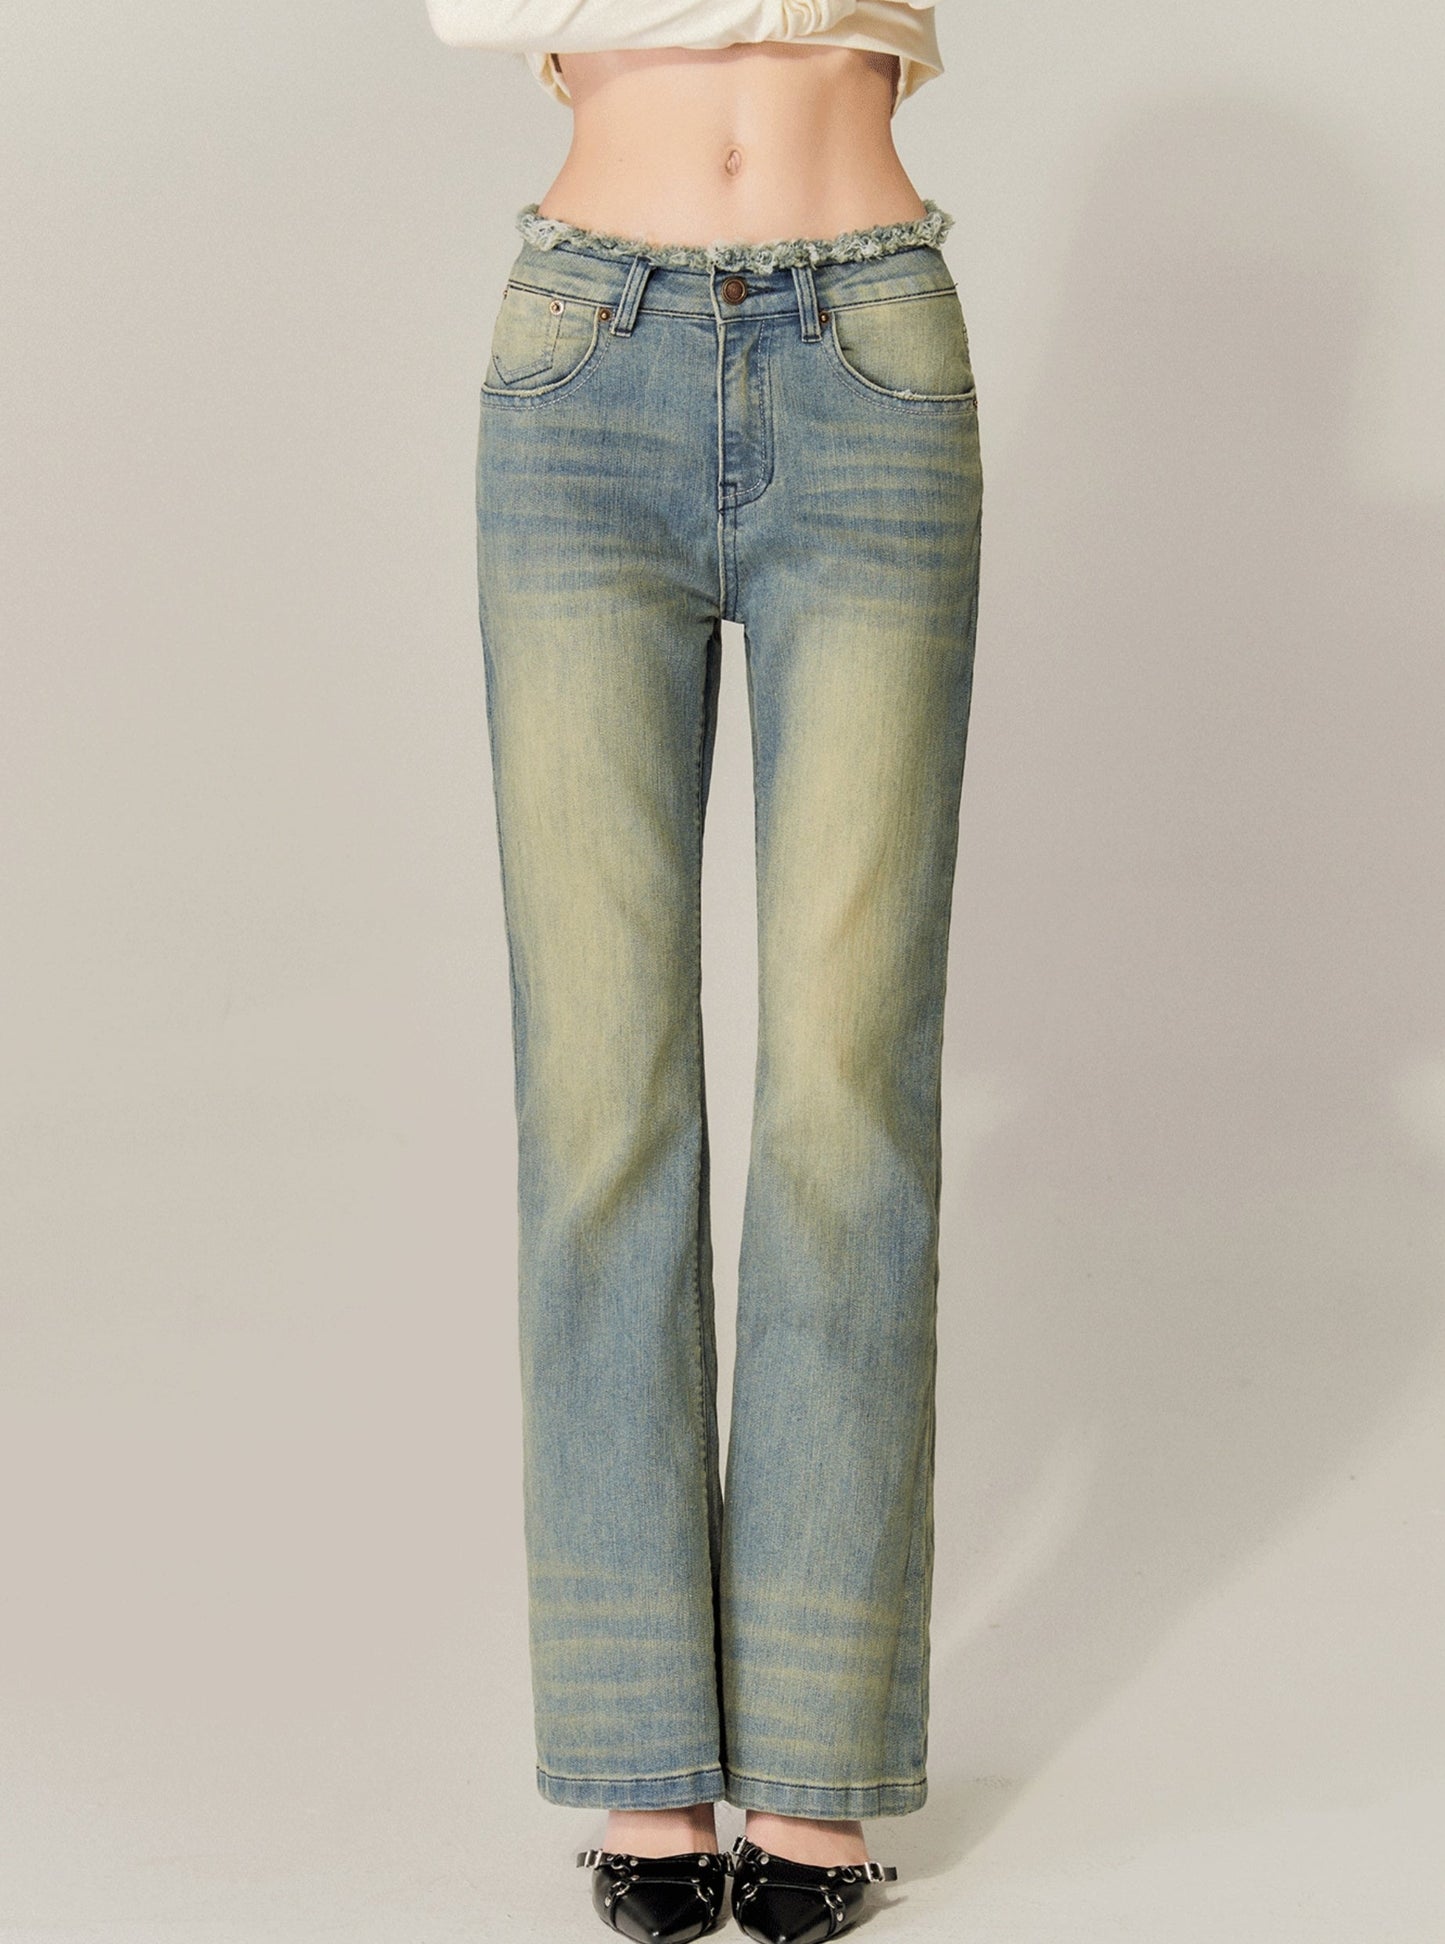 American retro washed flared jeans